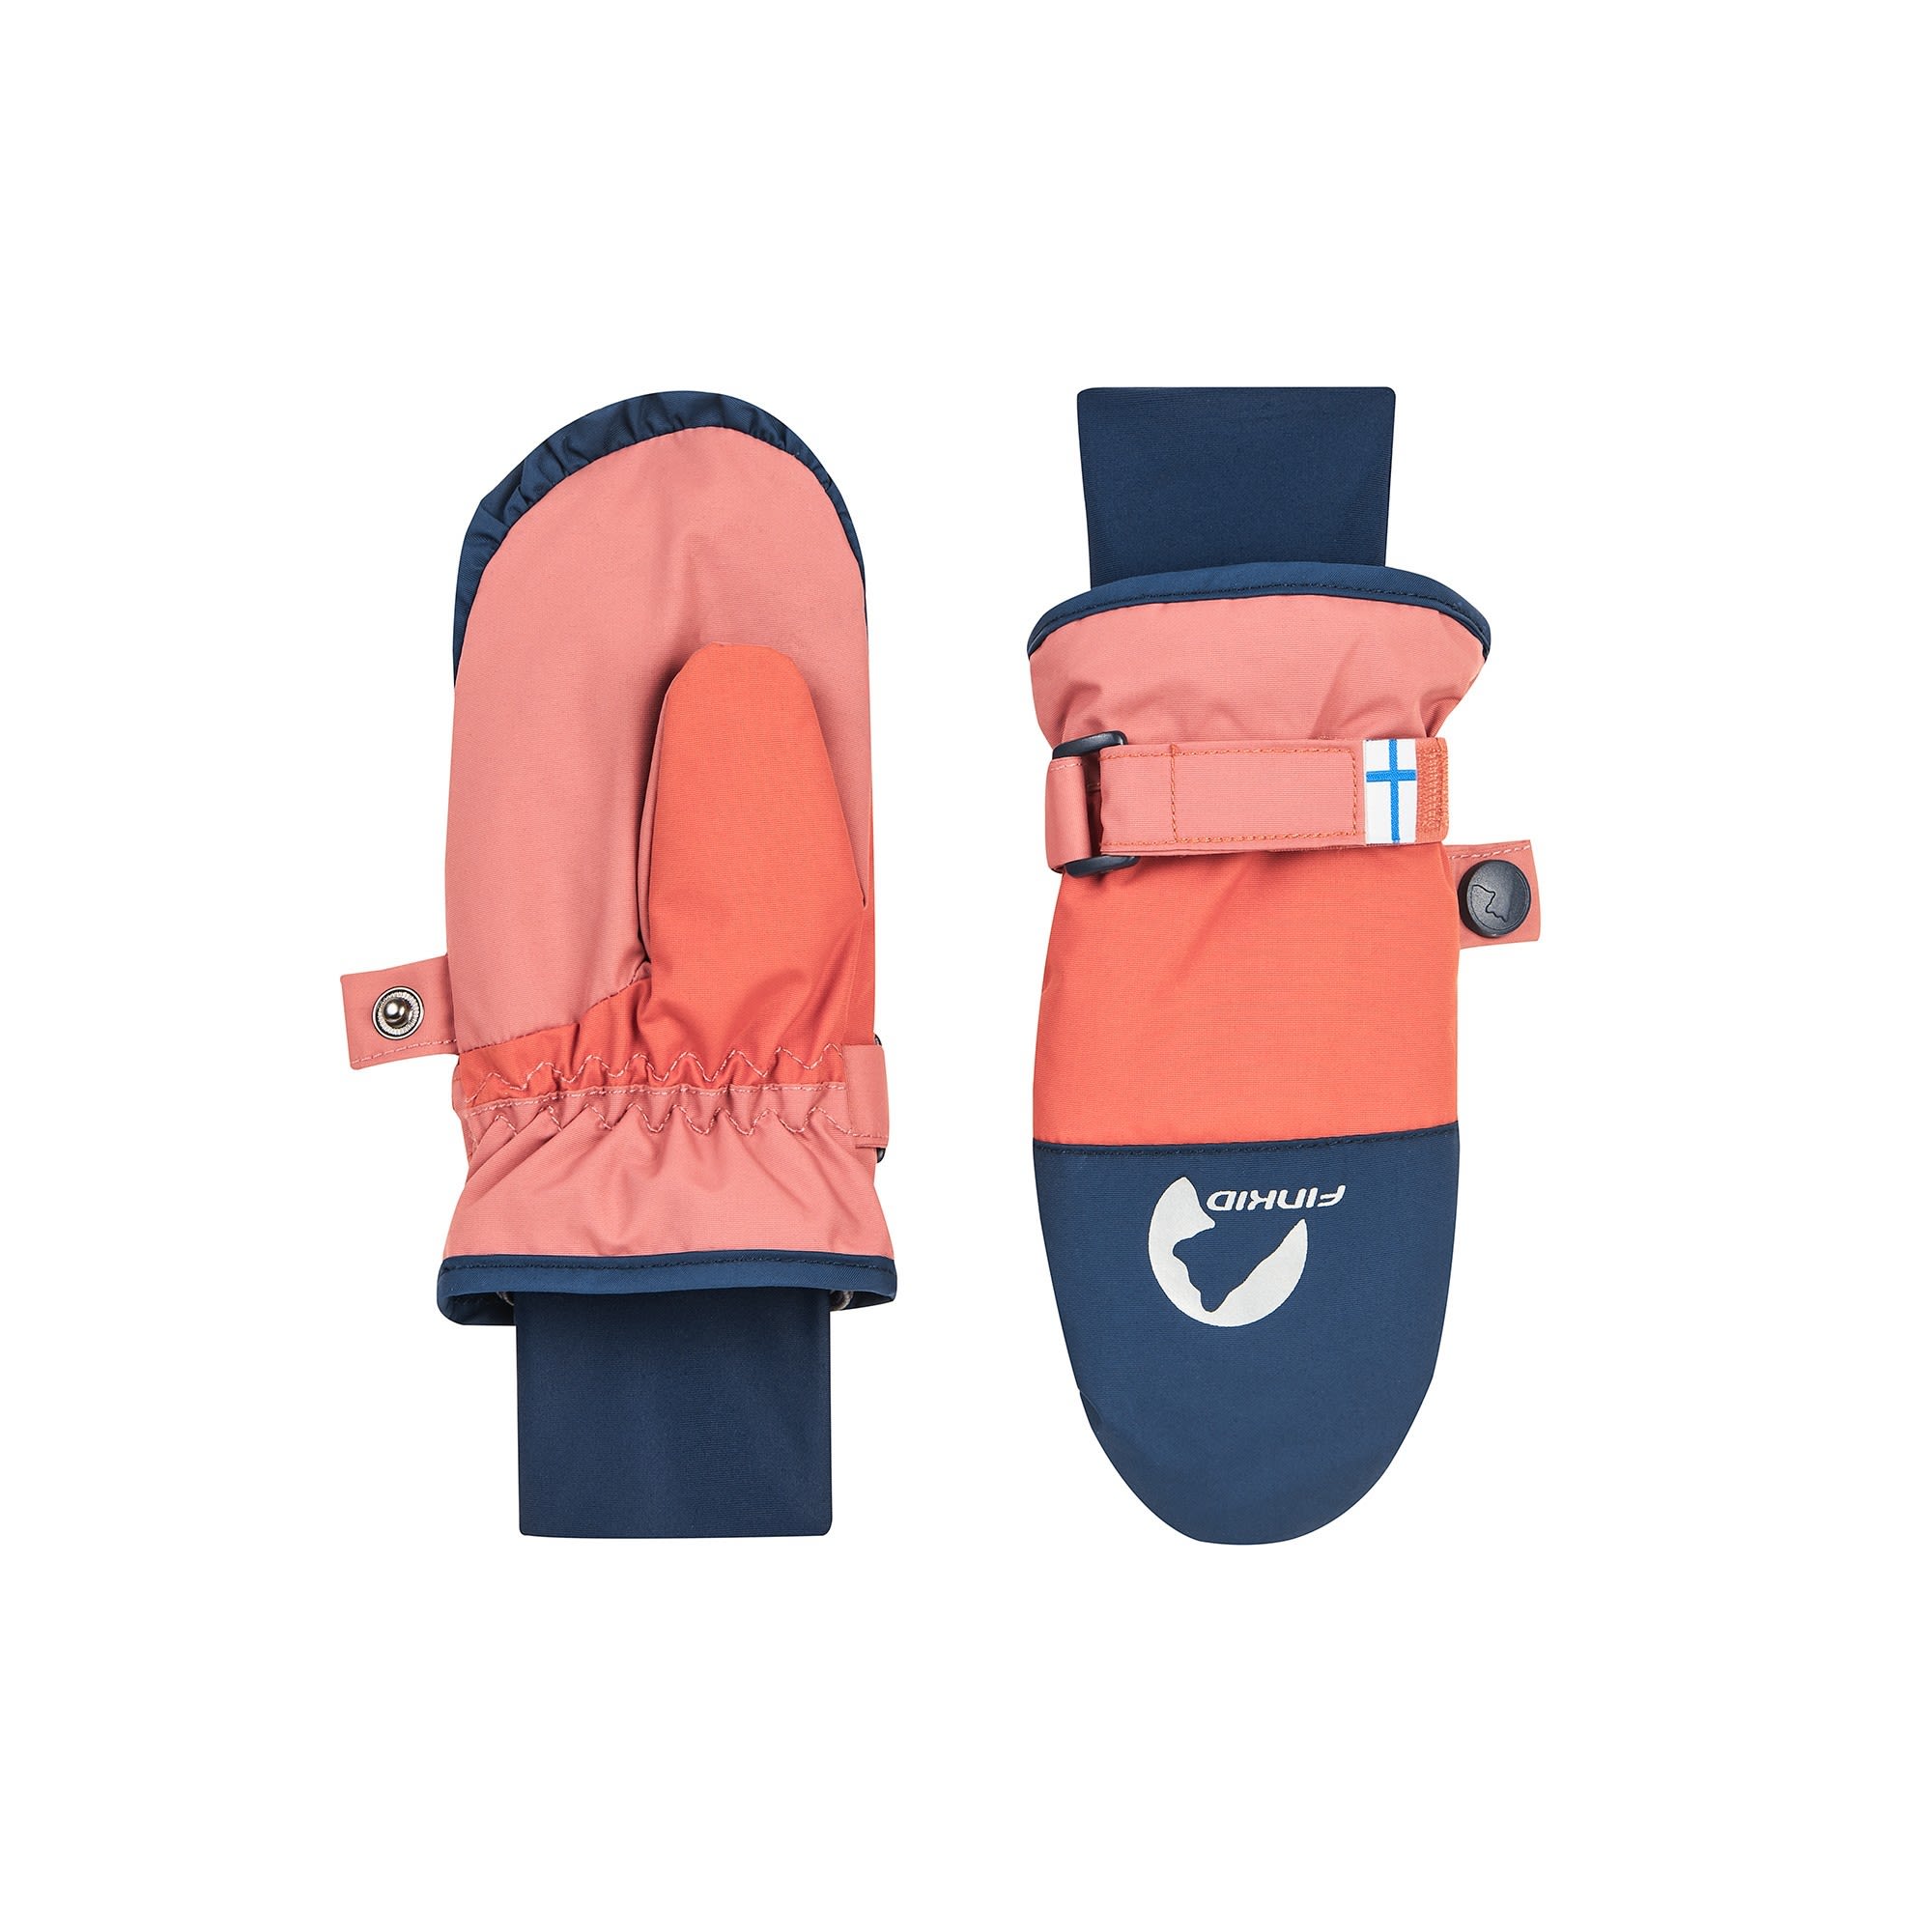 Finkid Kirjava Colorblock - Pink- Fausthandschuhe- Grsse S - Farbe Rose - Navy unter Finkid